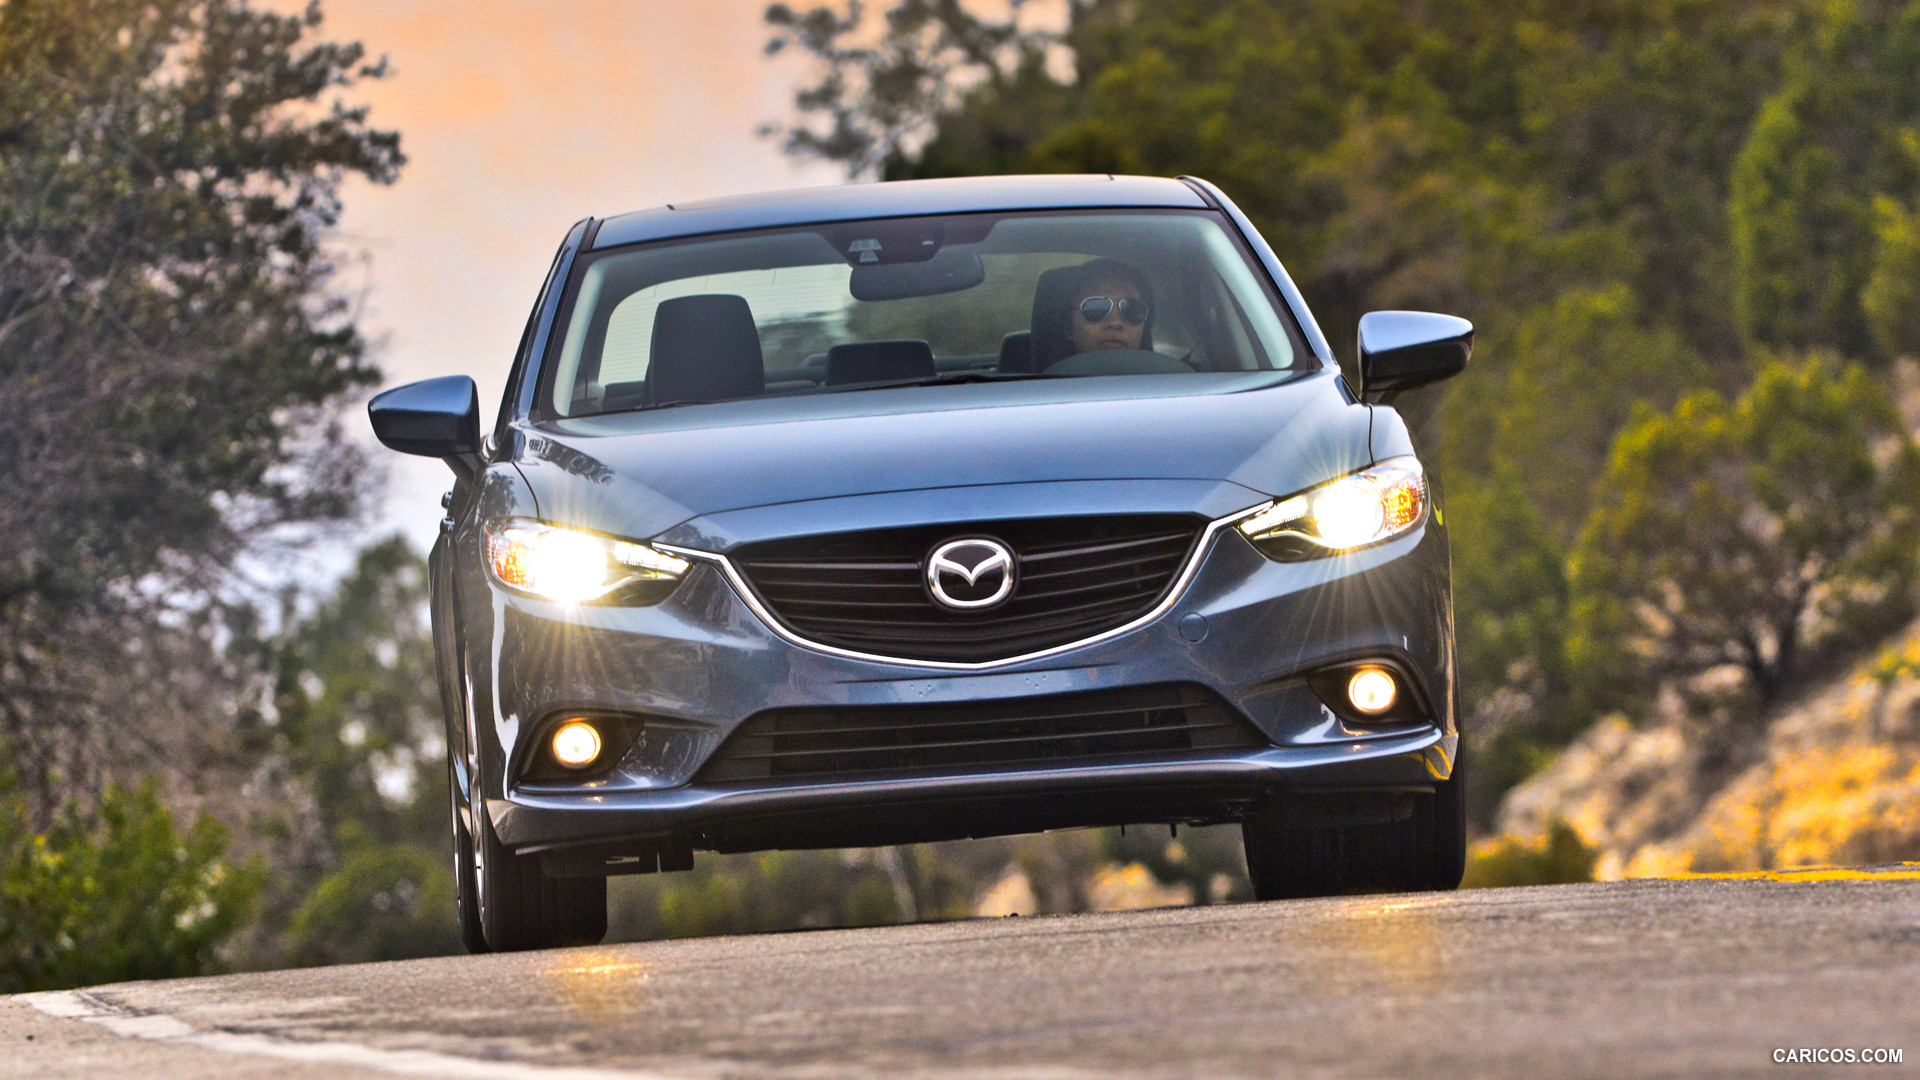 2014 Mazda6 GT - Front, #133 of 179